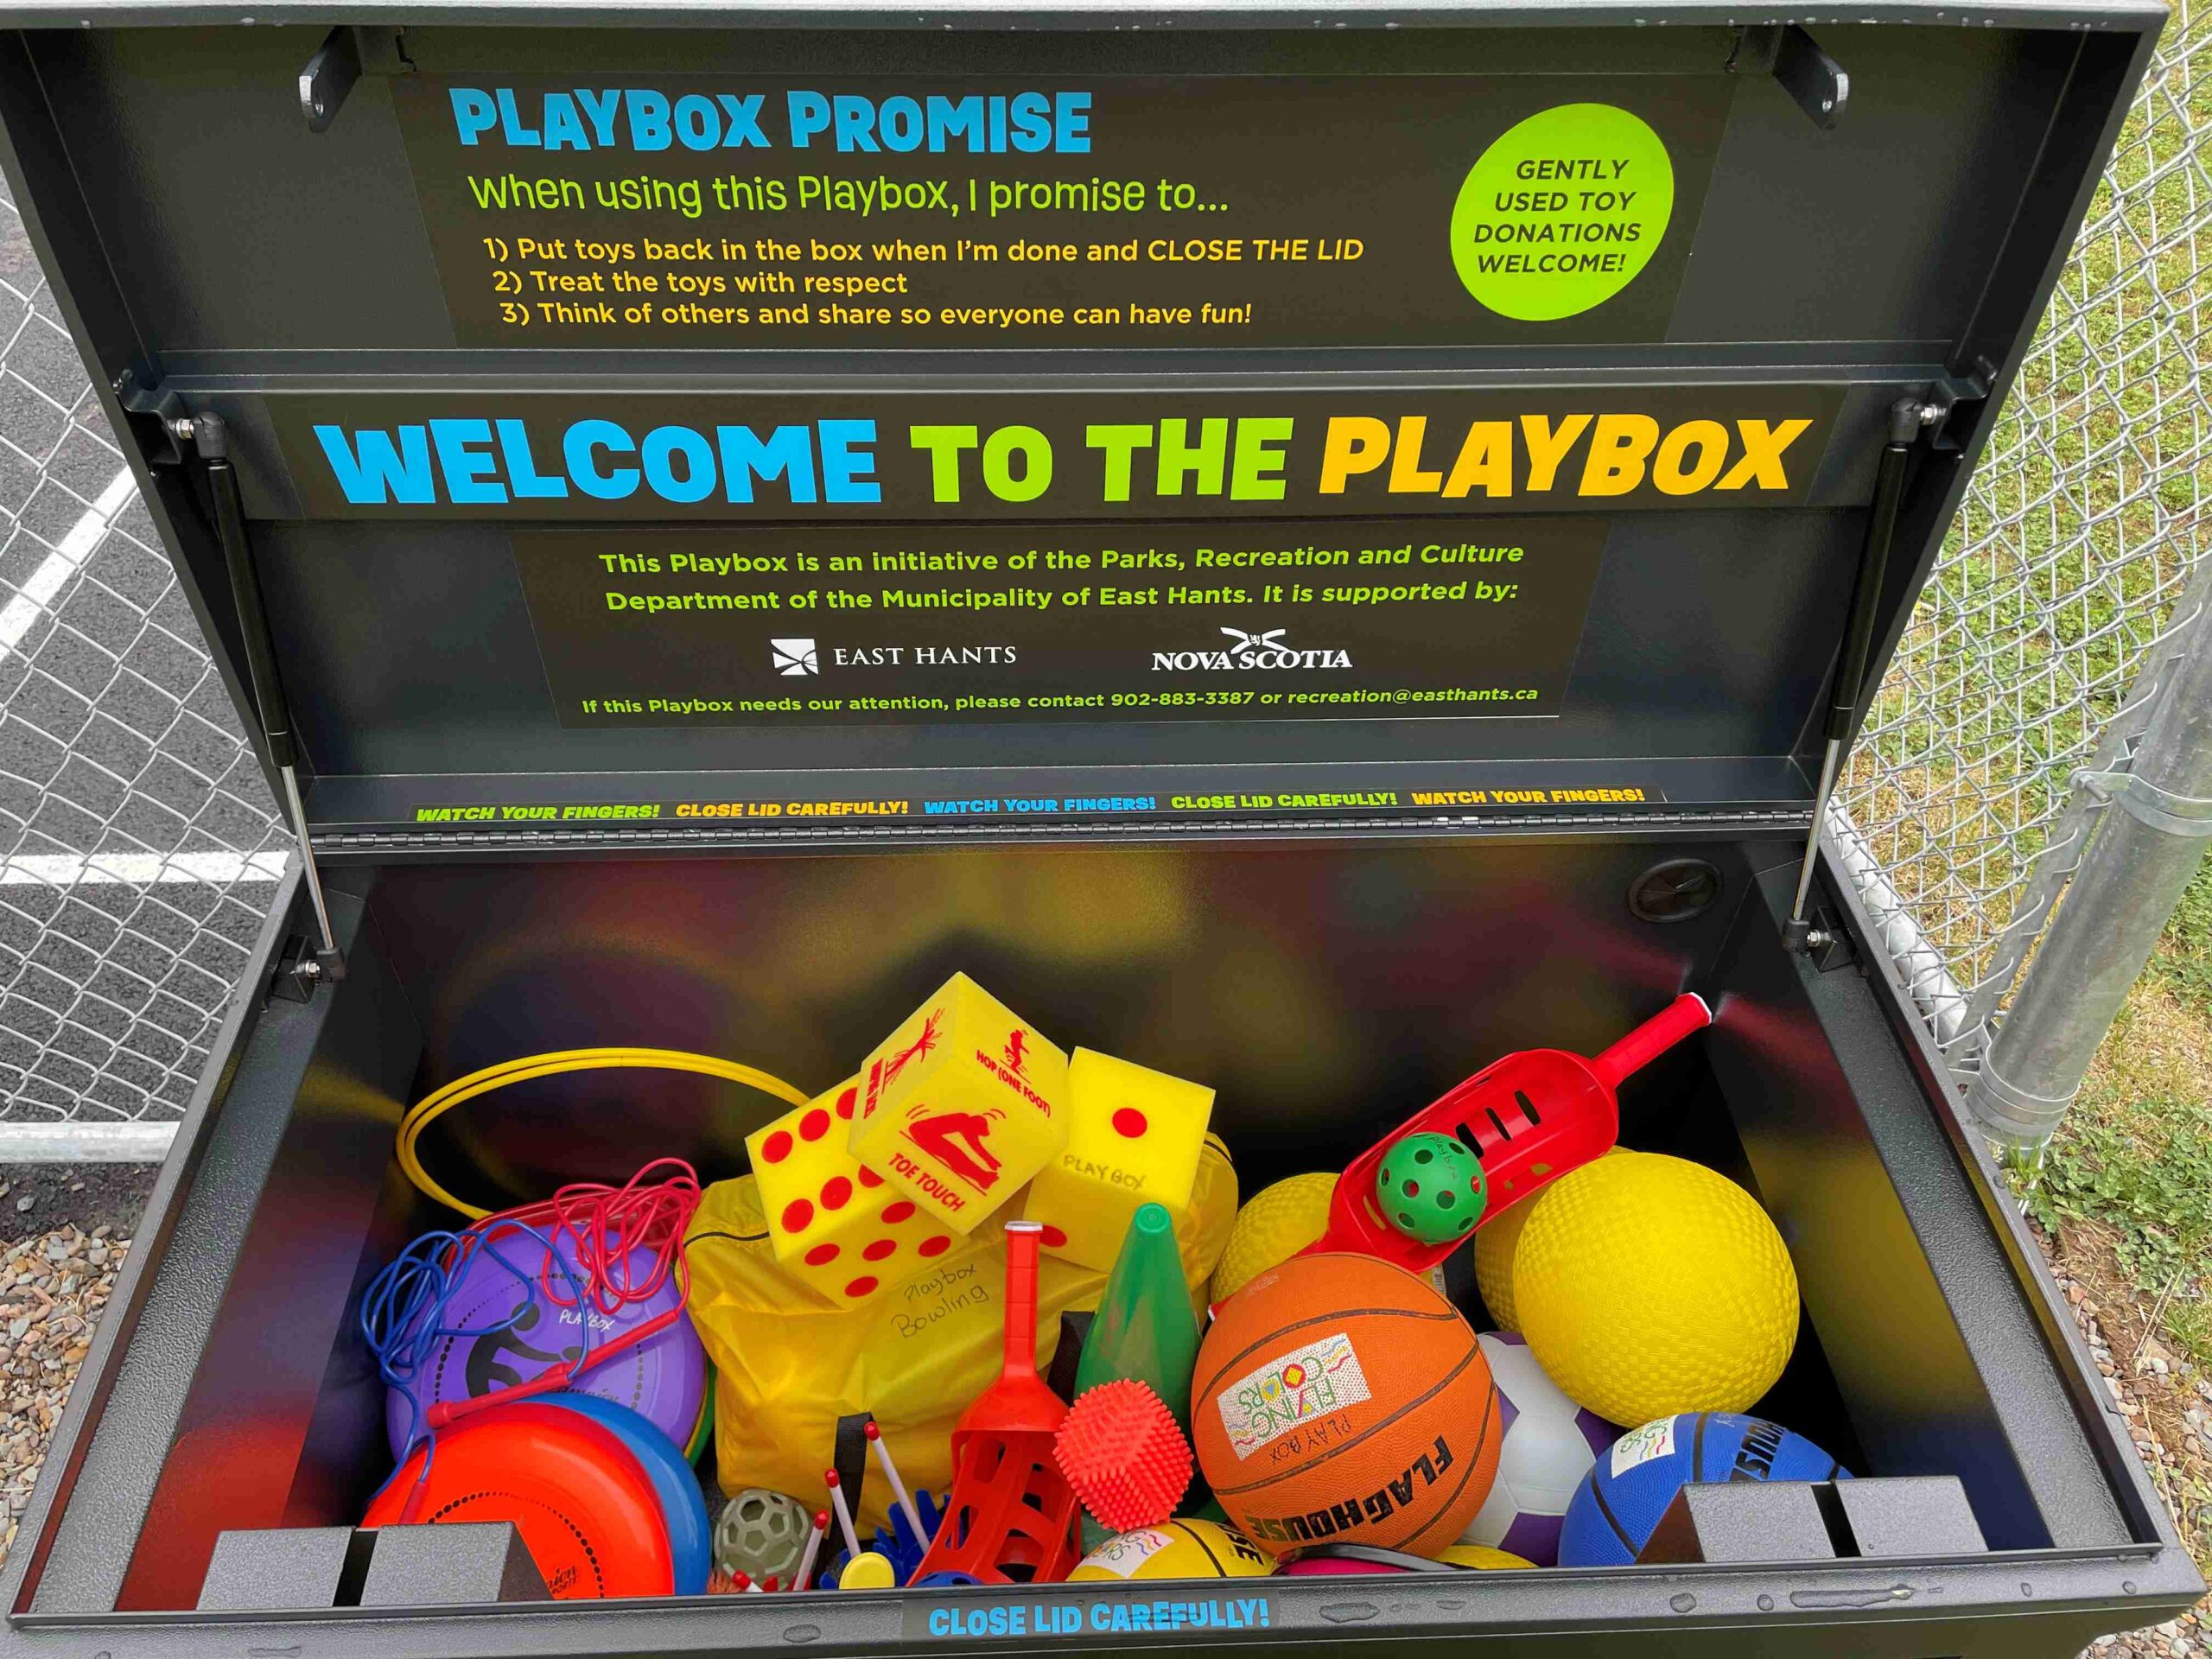 A large black box with colourful decals filled with outdoor toys